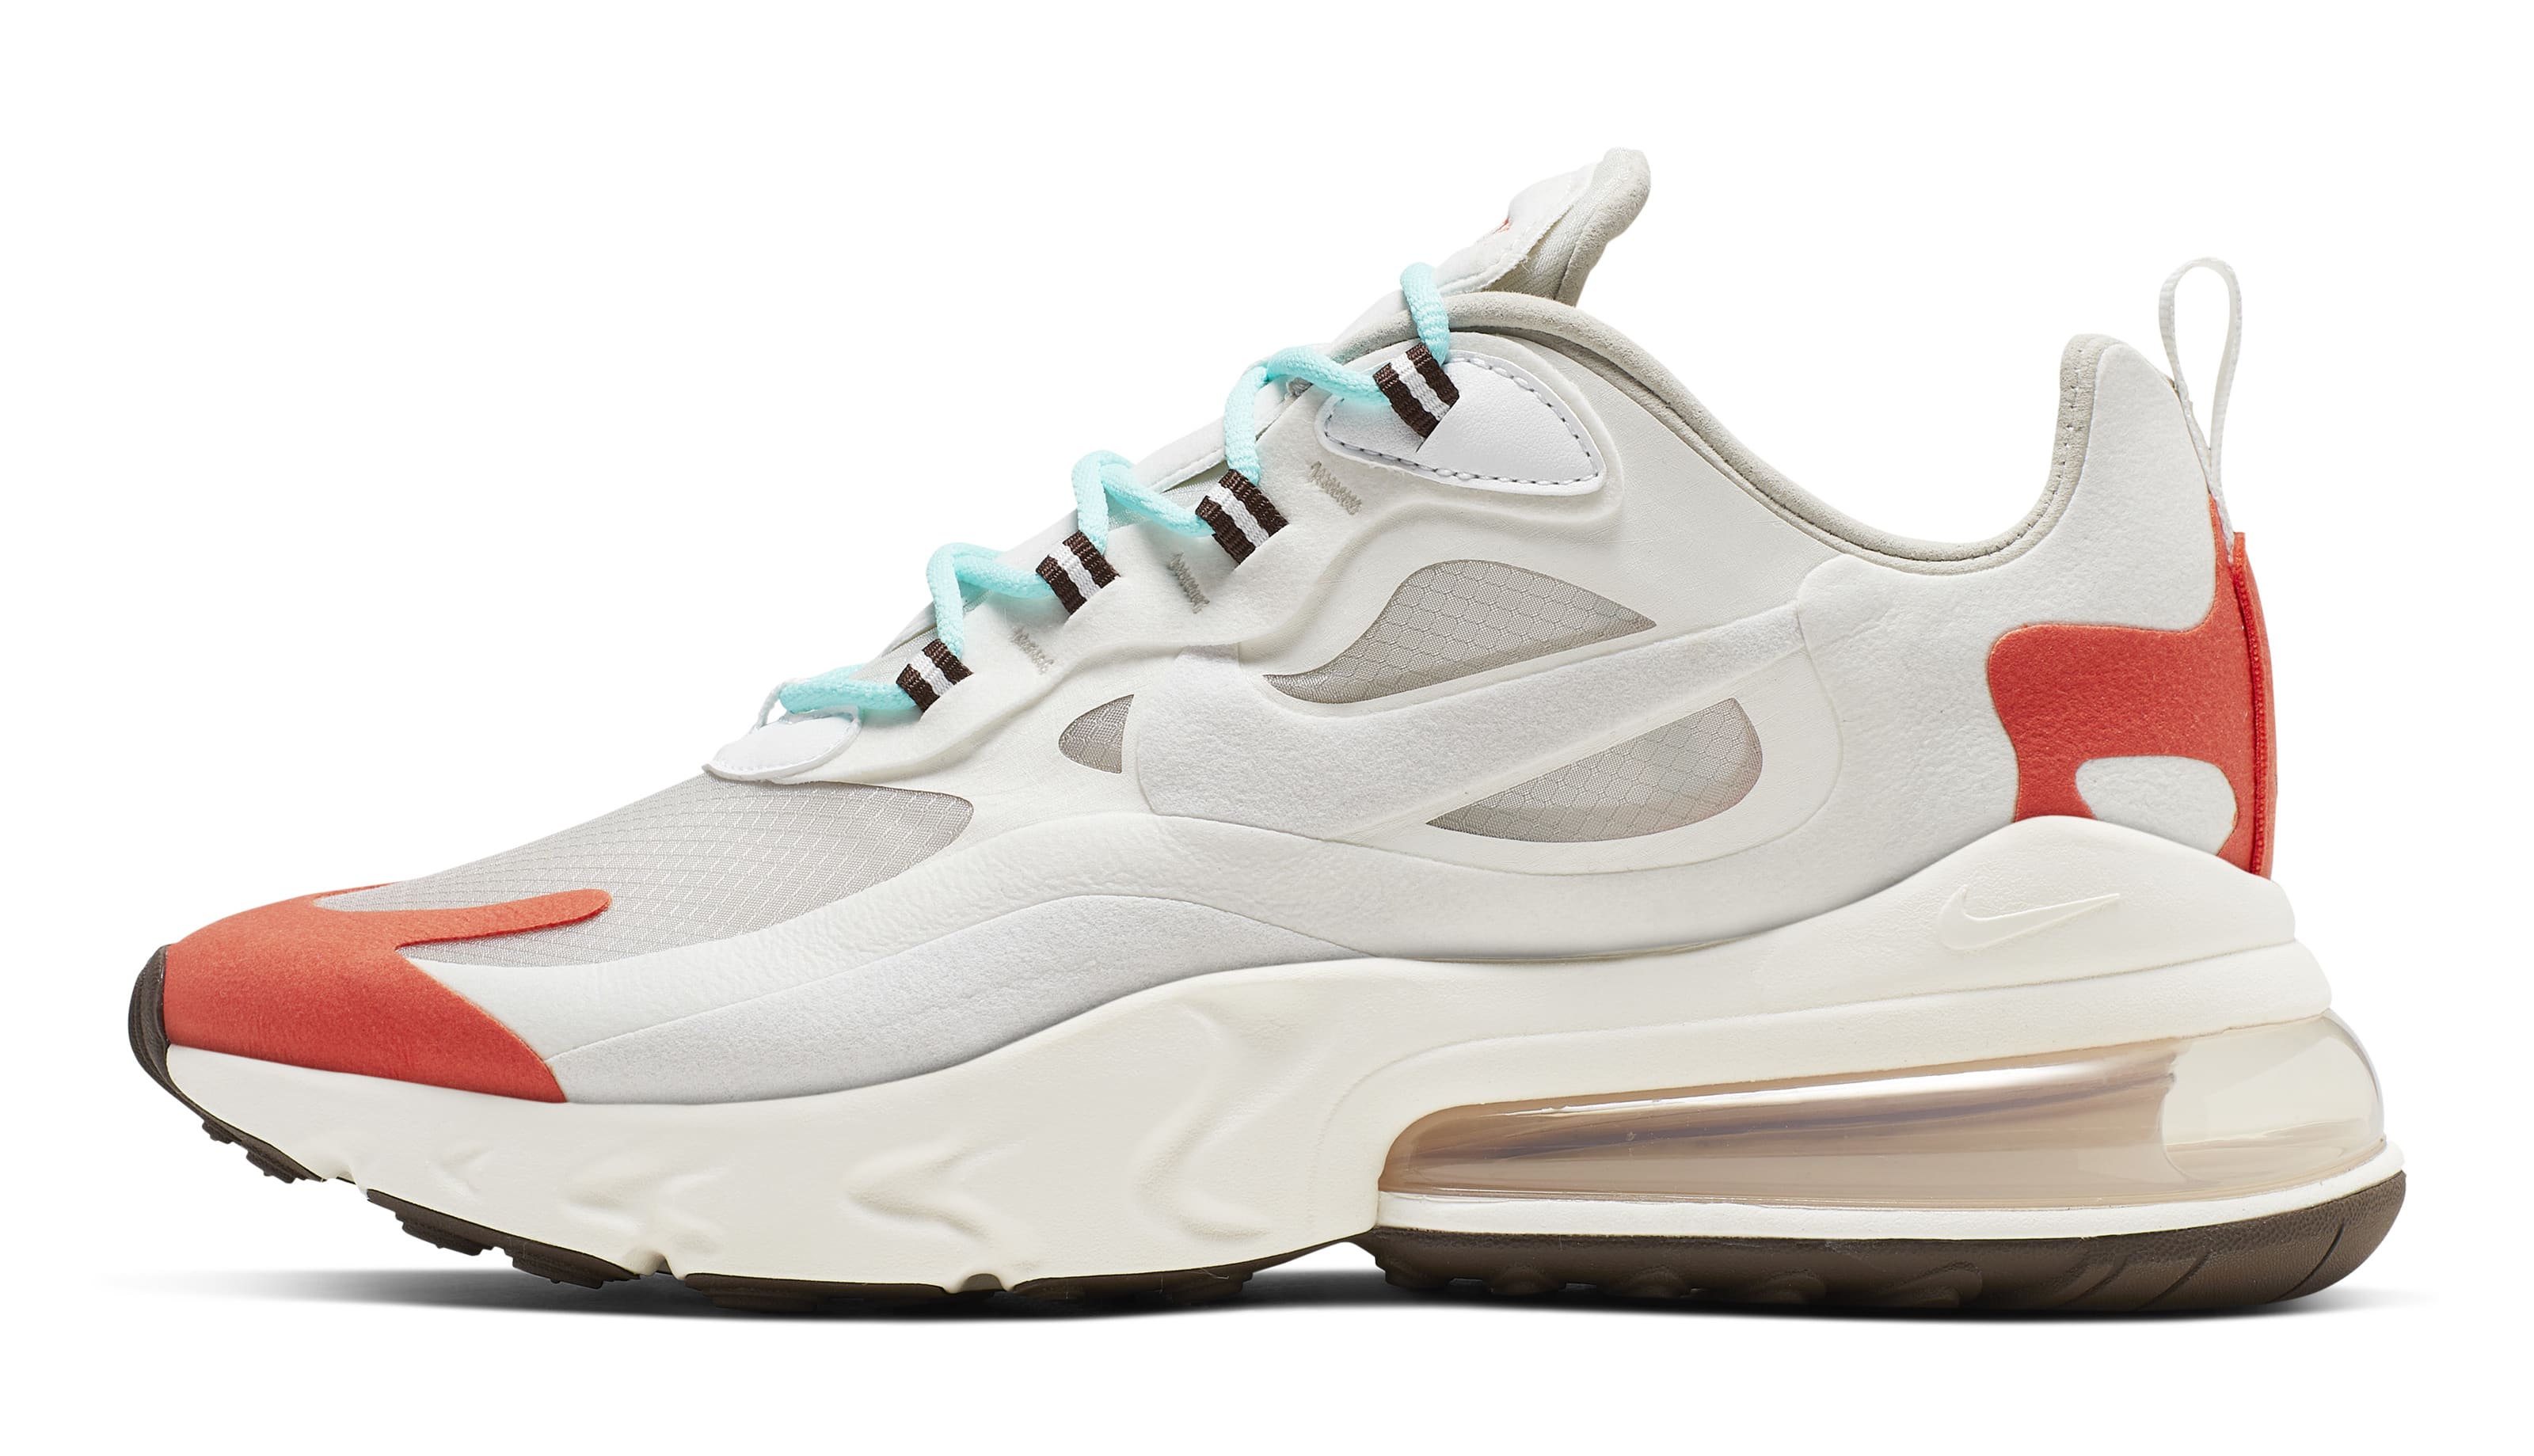 Nike Combines the Air Max 270 With React